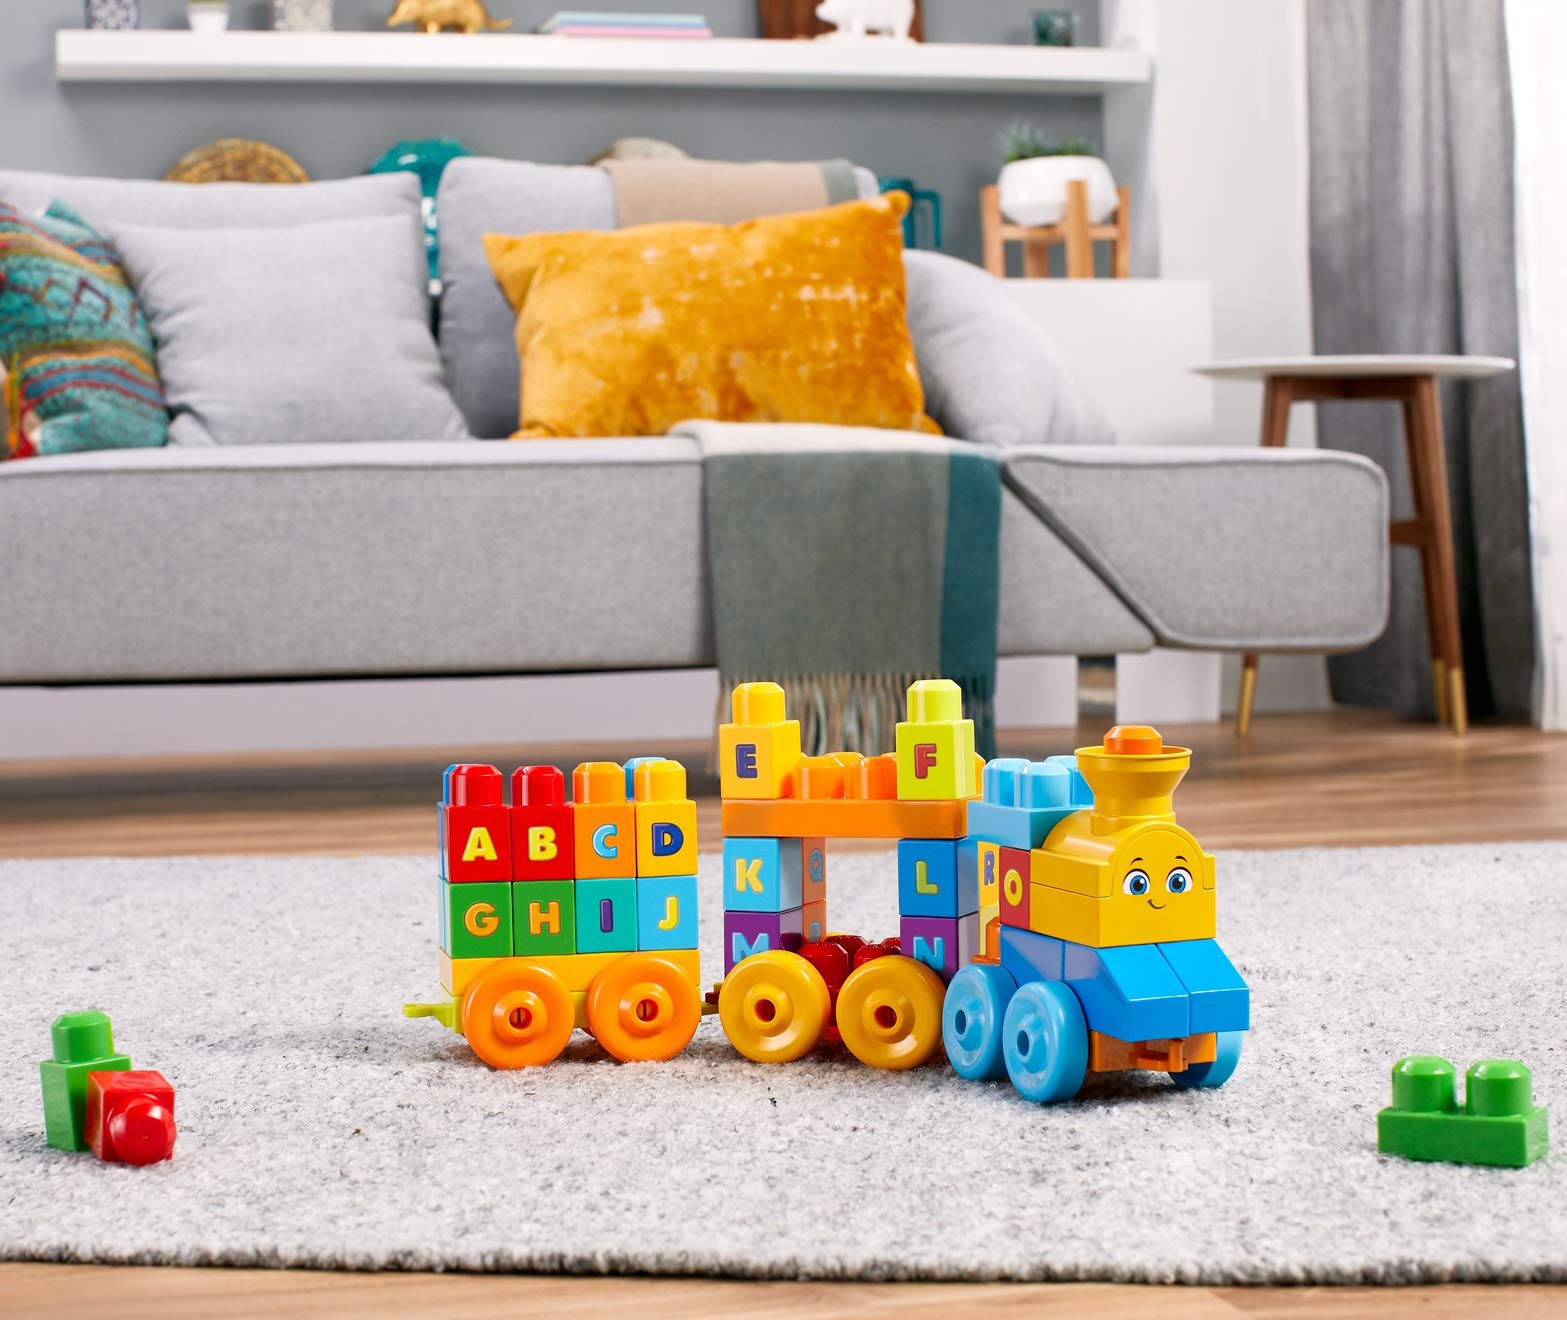 MEGA BLOKS Fisher-Price ABC Blocks Building Toy, ABC Musical Train with 50 Pieces, Music and Sounds for Toddlers, Gift Ideas for Kids Age 1+ Years